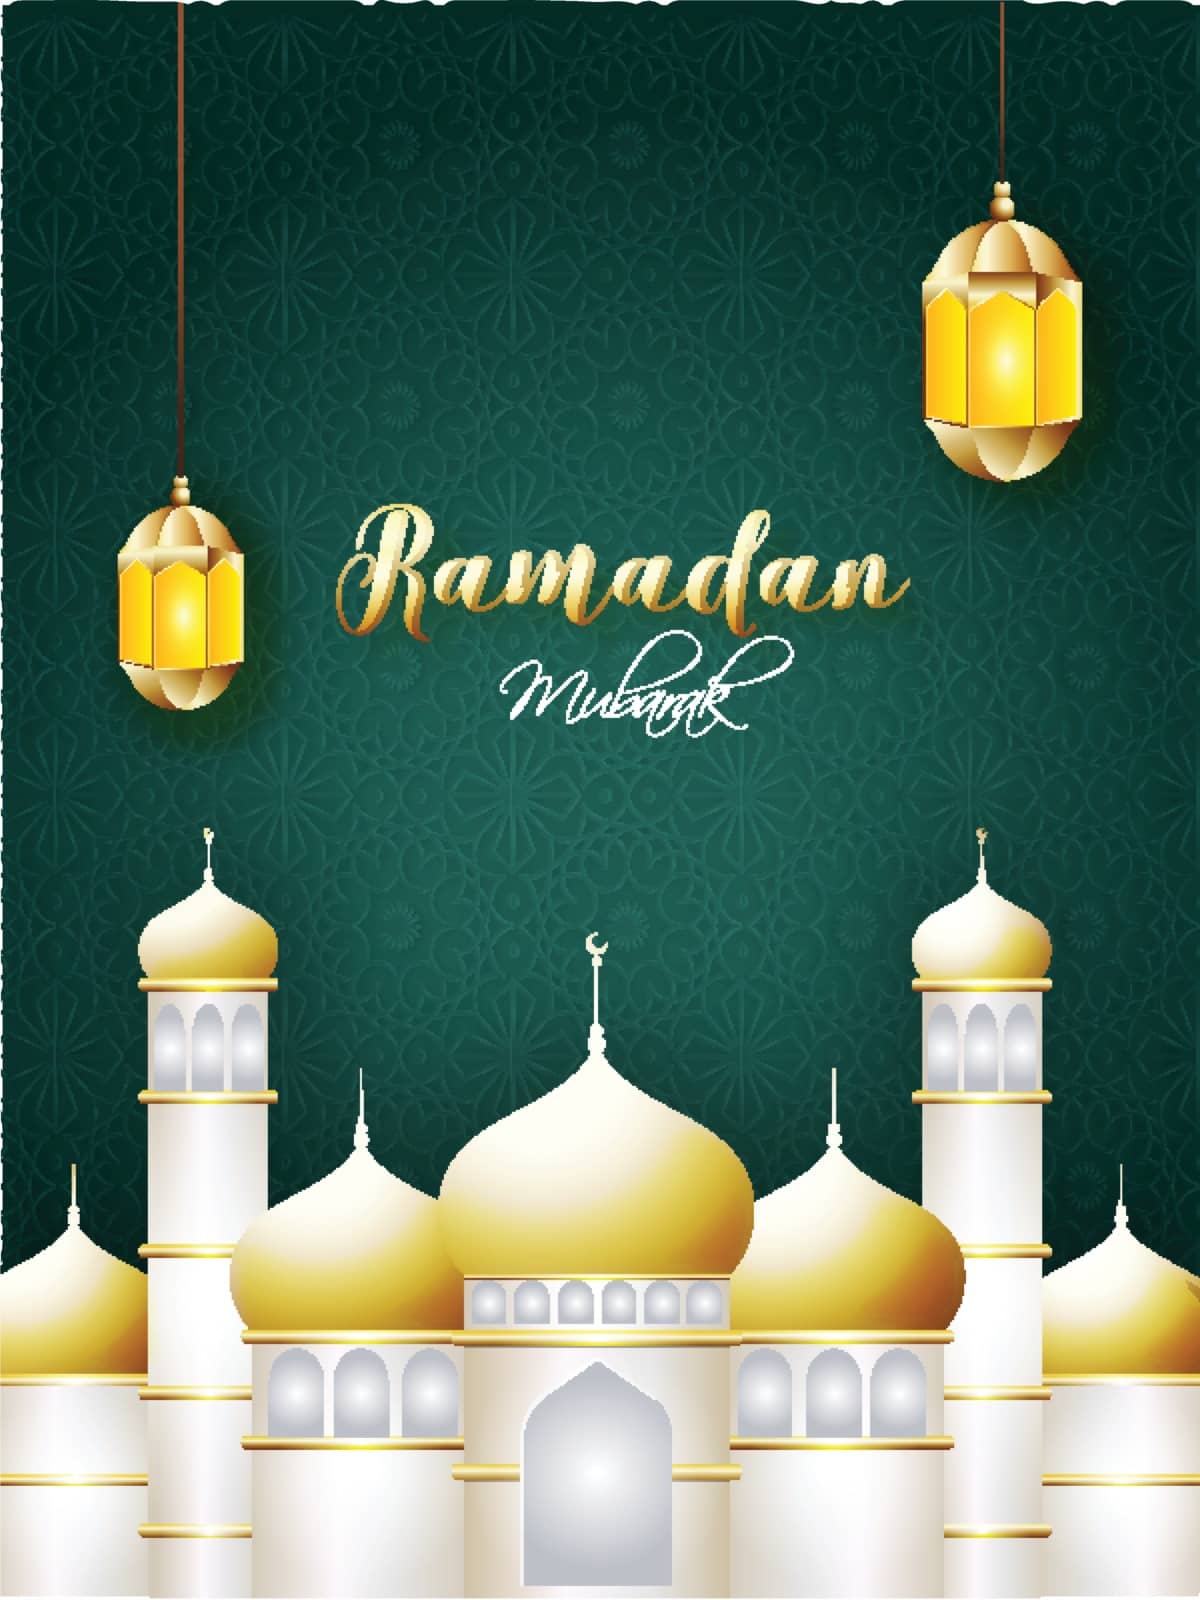 Ramadan Mubarak template or flyer design with illustration of mo by aispl